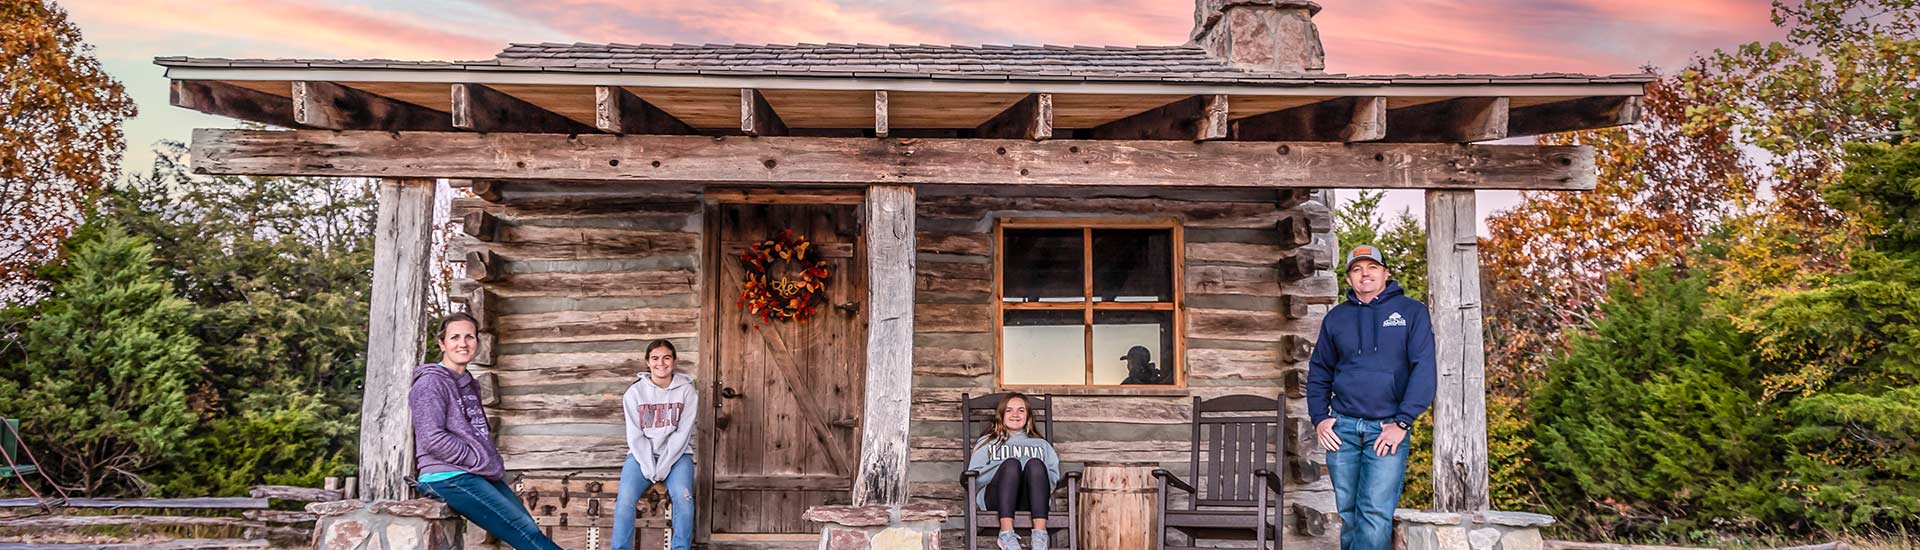 Four guests on a Pink Jeep Branson Tour pose on the porch of a historic log cabin atop Baird Mountain, lighted by a pink sunset.